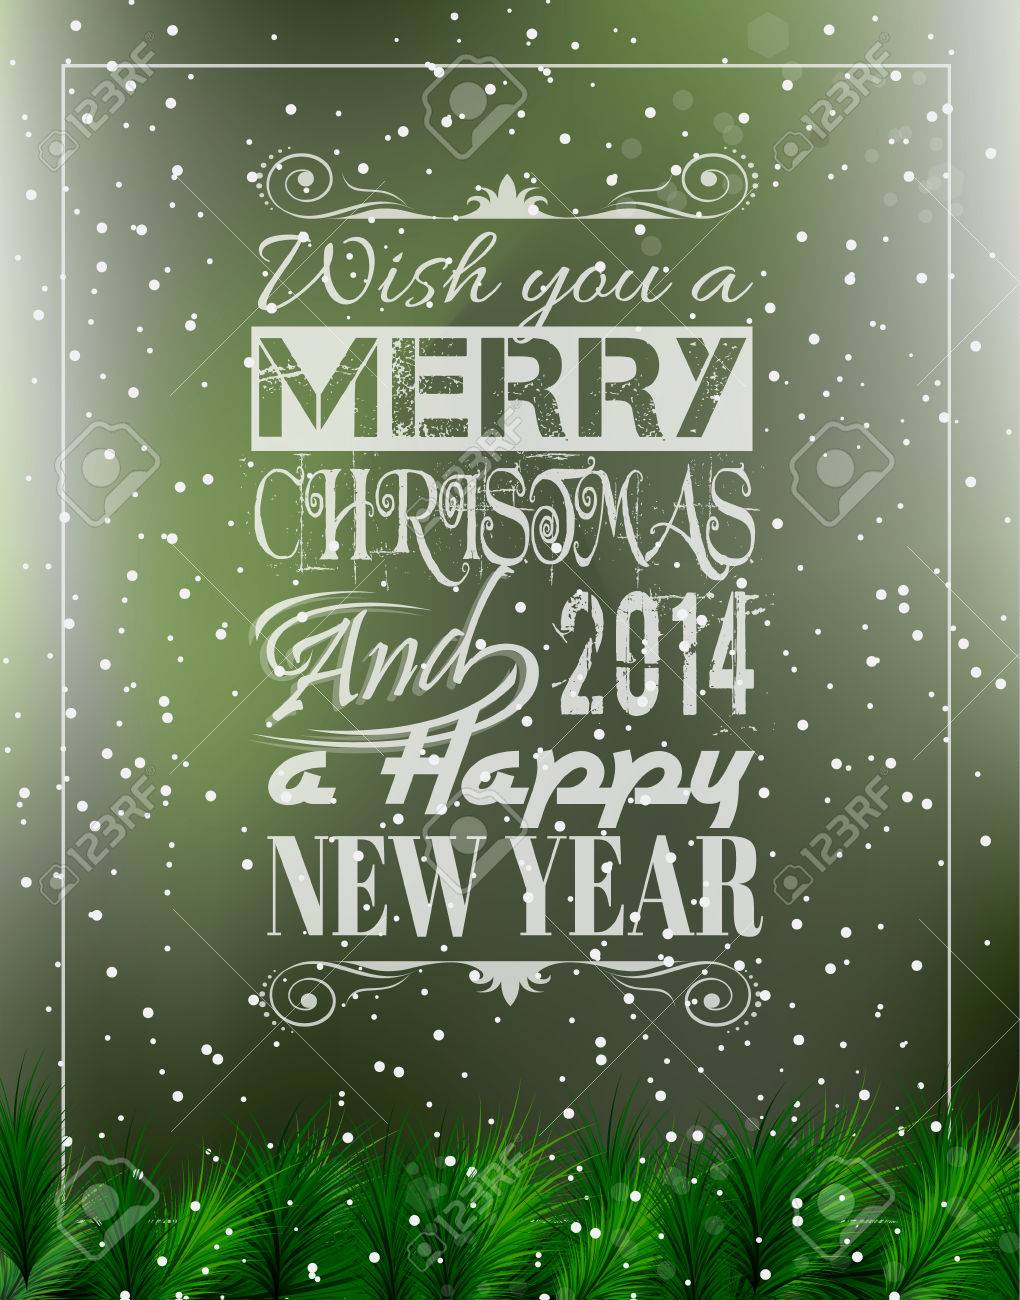 Merry Christmas Vintage Retro Typo Background For Your Greetings